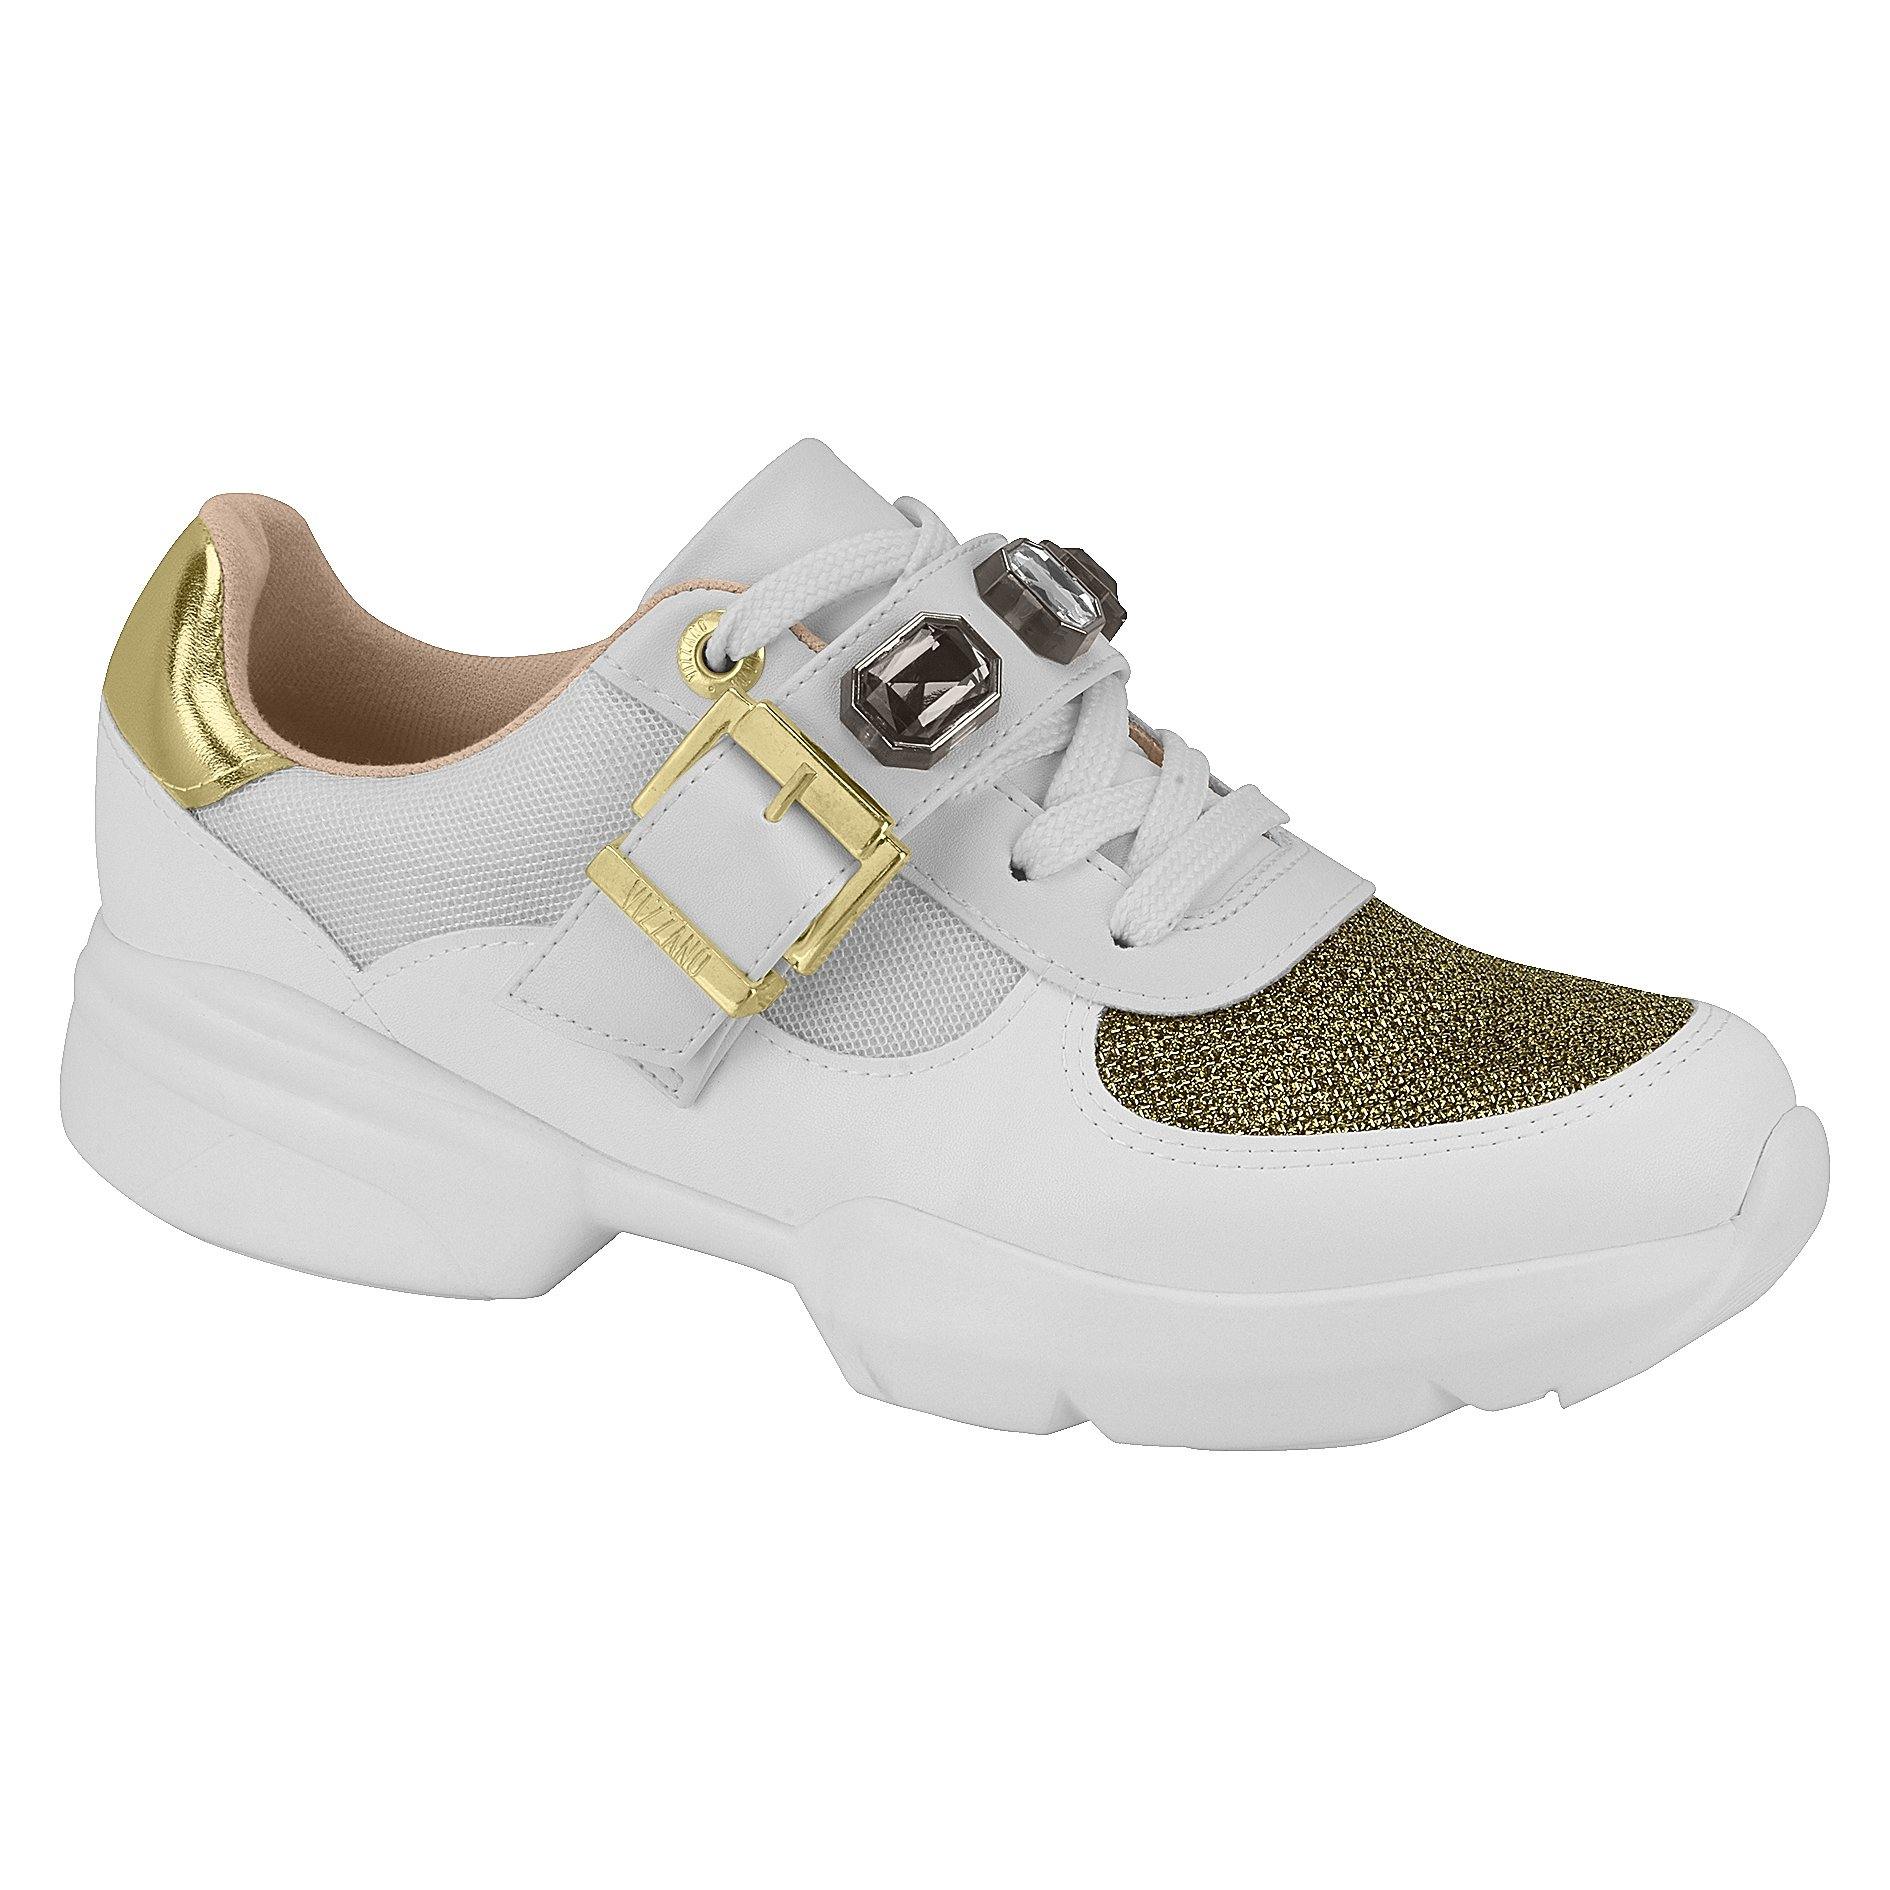 Vizzano 1314-113 Chunky Sole Sneaker in White and Gold - Charley Boutique